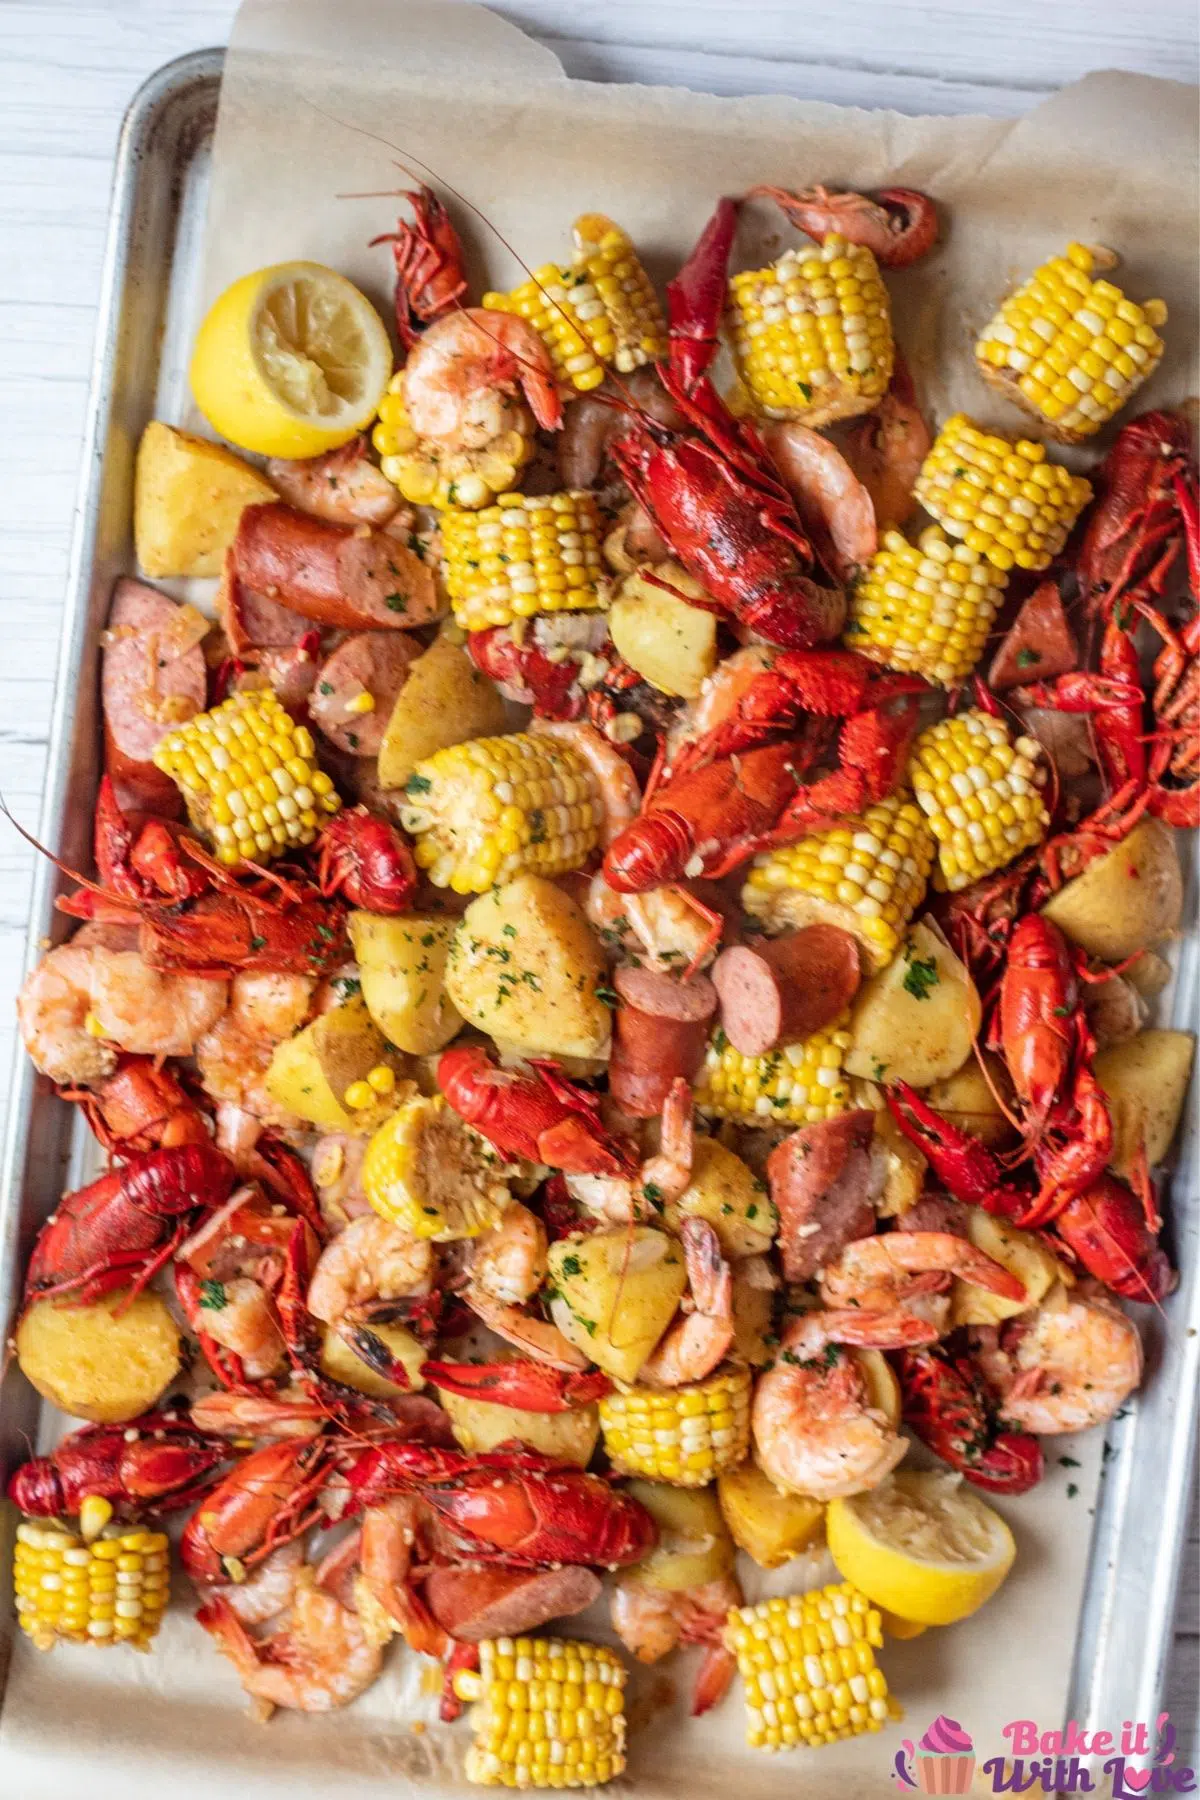 Tall overhead image of the cooked Cajun seafood boil.